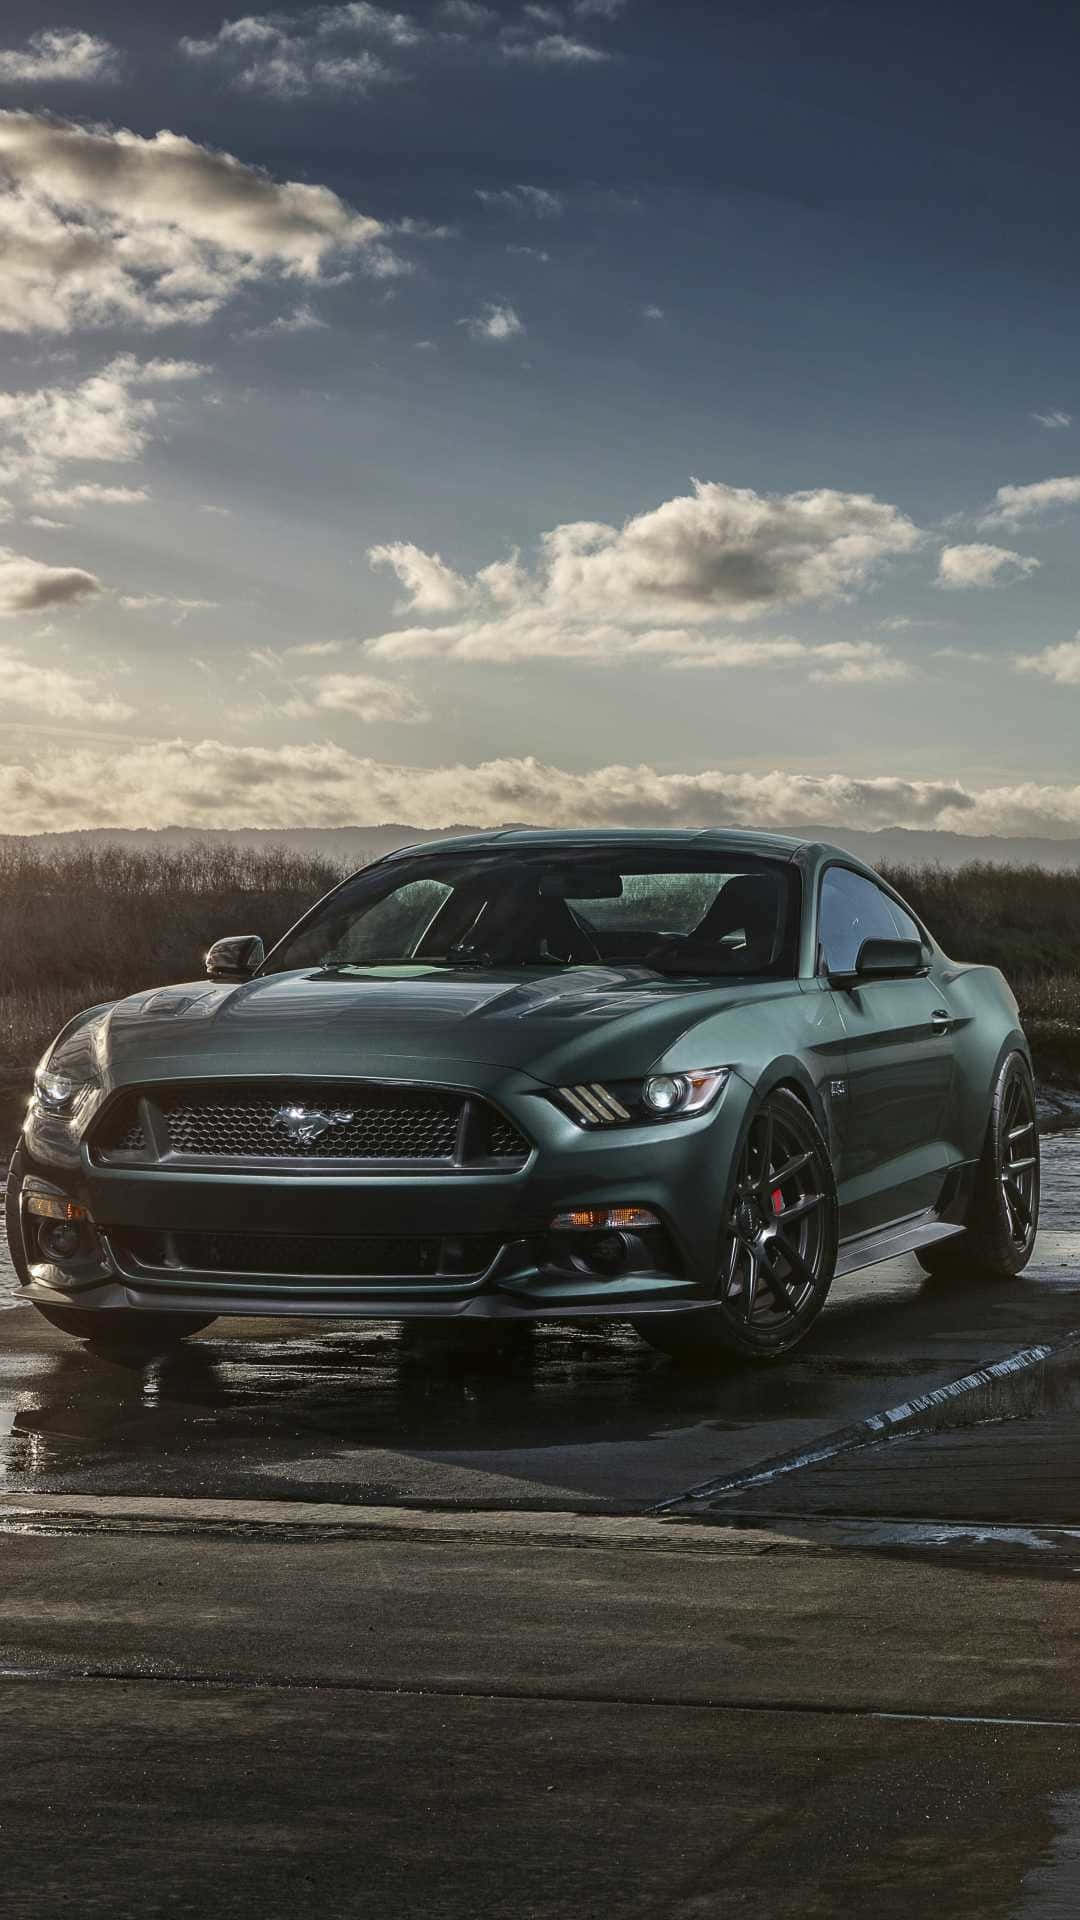 Unlock the Power of a Mustang with an iPhone Wallpaper